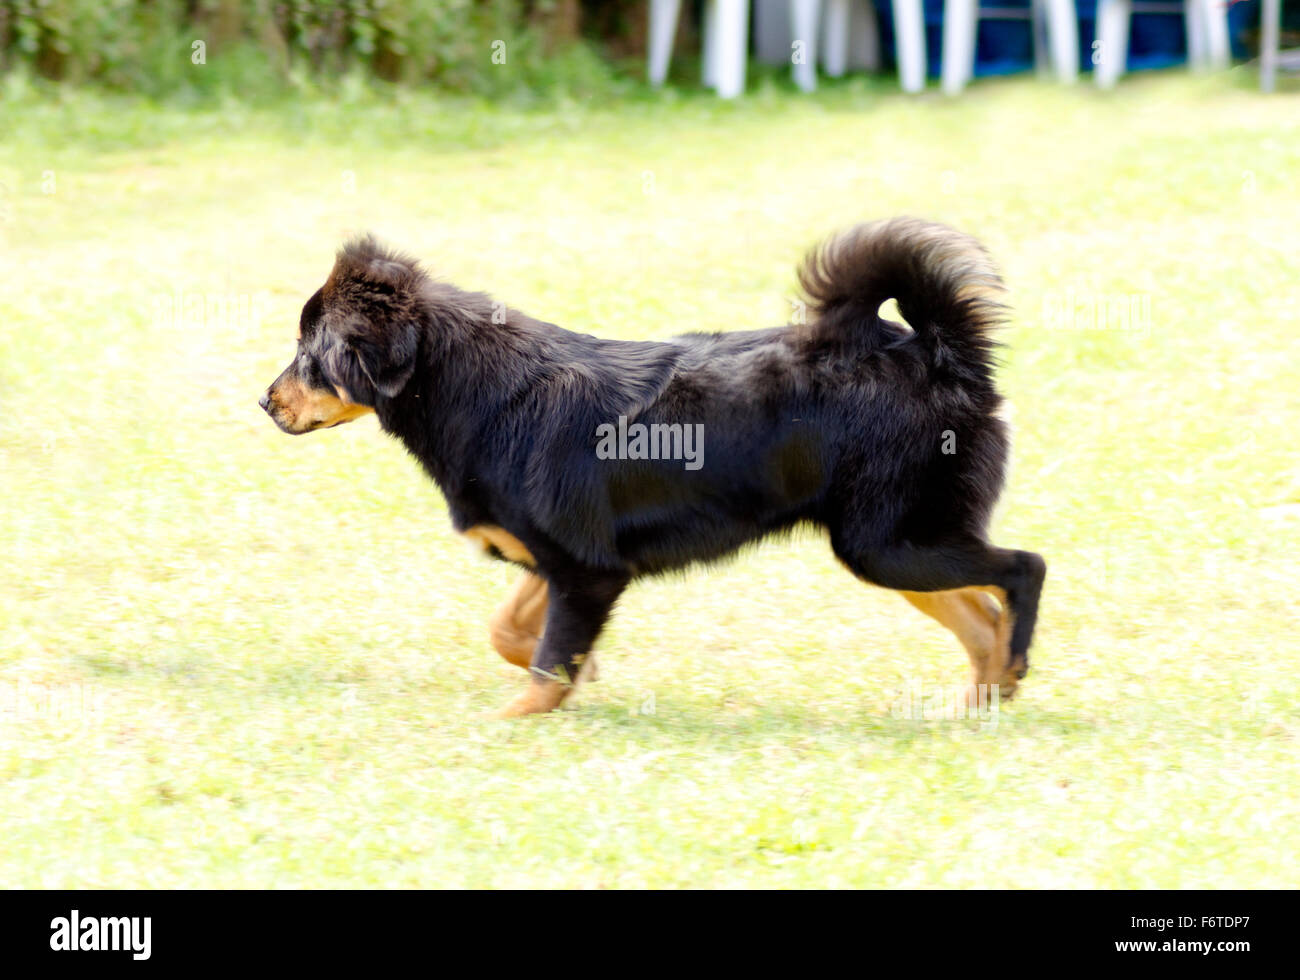 A young, beautiful, black and tan - gold Tibetan Mastiff puppy dog running on the grass. Do Khyi dogs are known for being courag Stock Photo